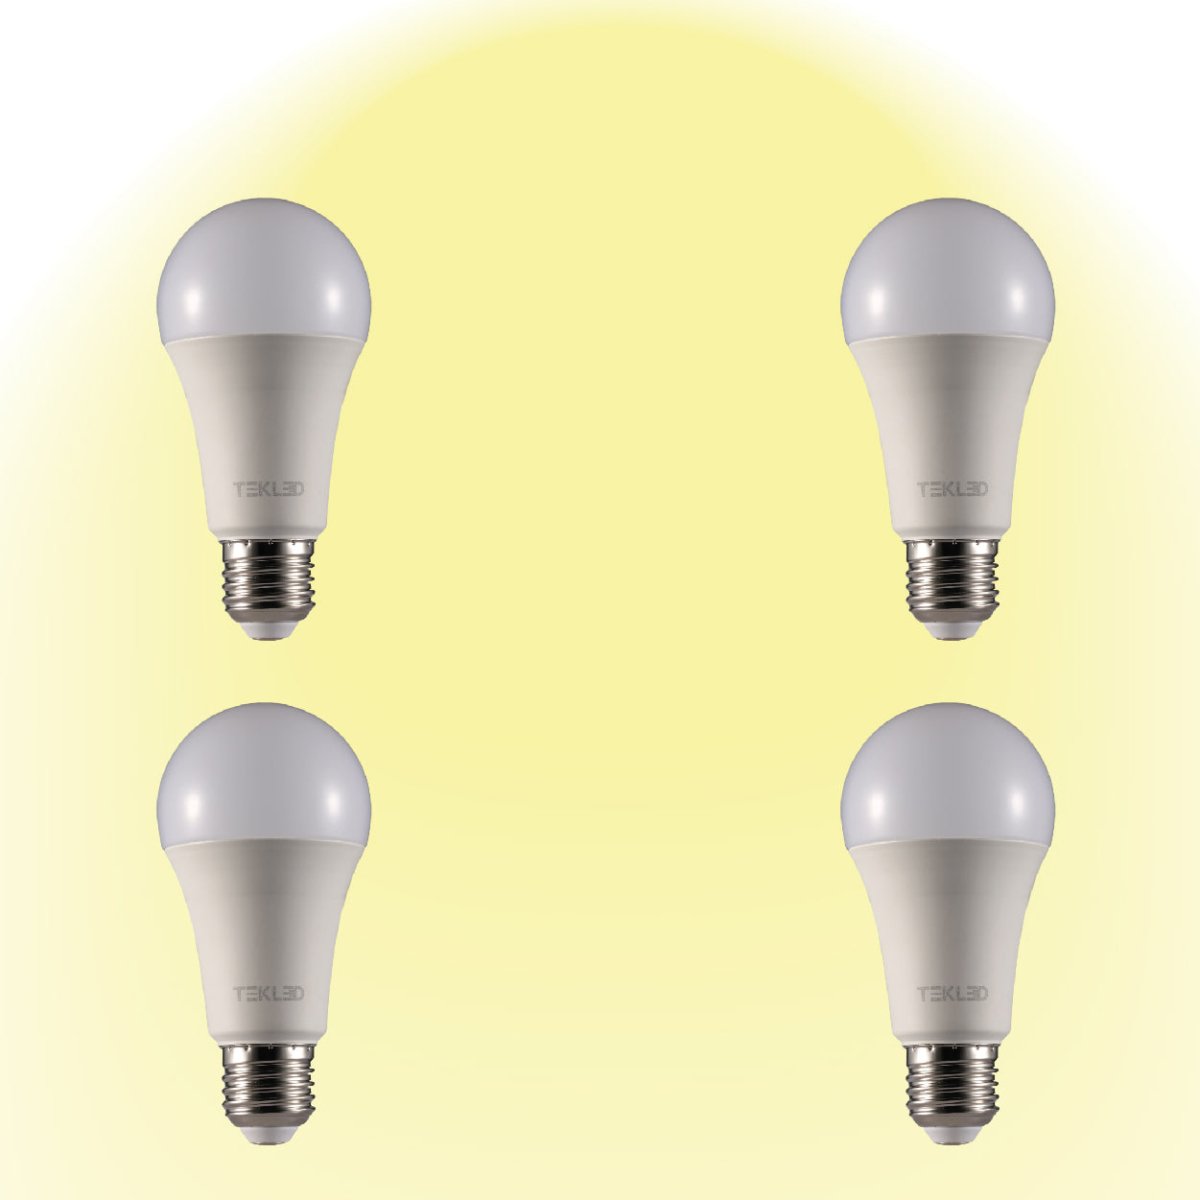 Virgo LED GLS Bulb A60 Dimmable E27 Edison Screw 2700K Warm White 12 W Pack of 4 527-156324